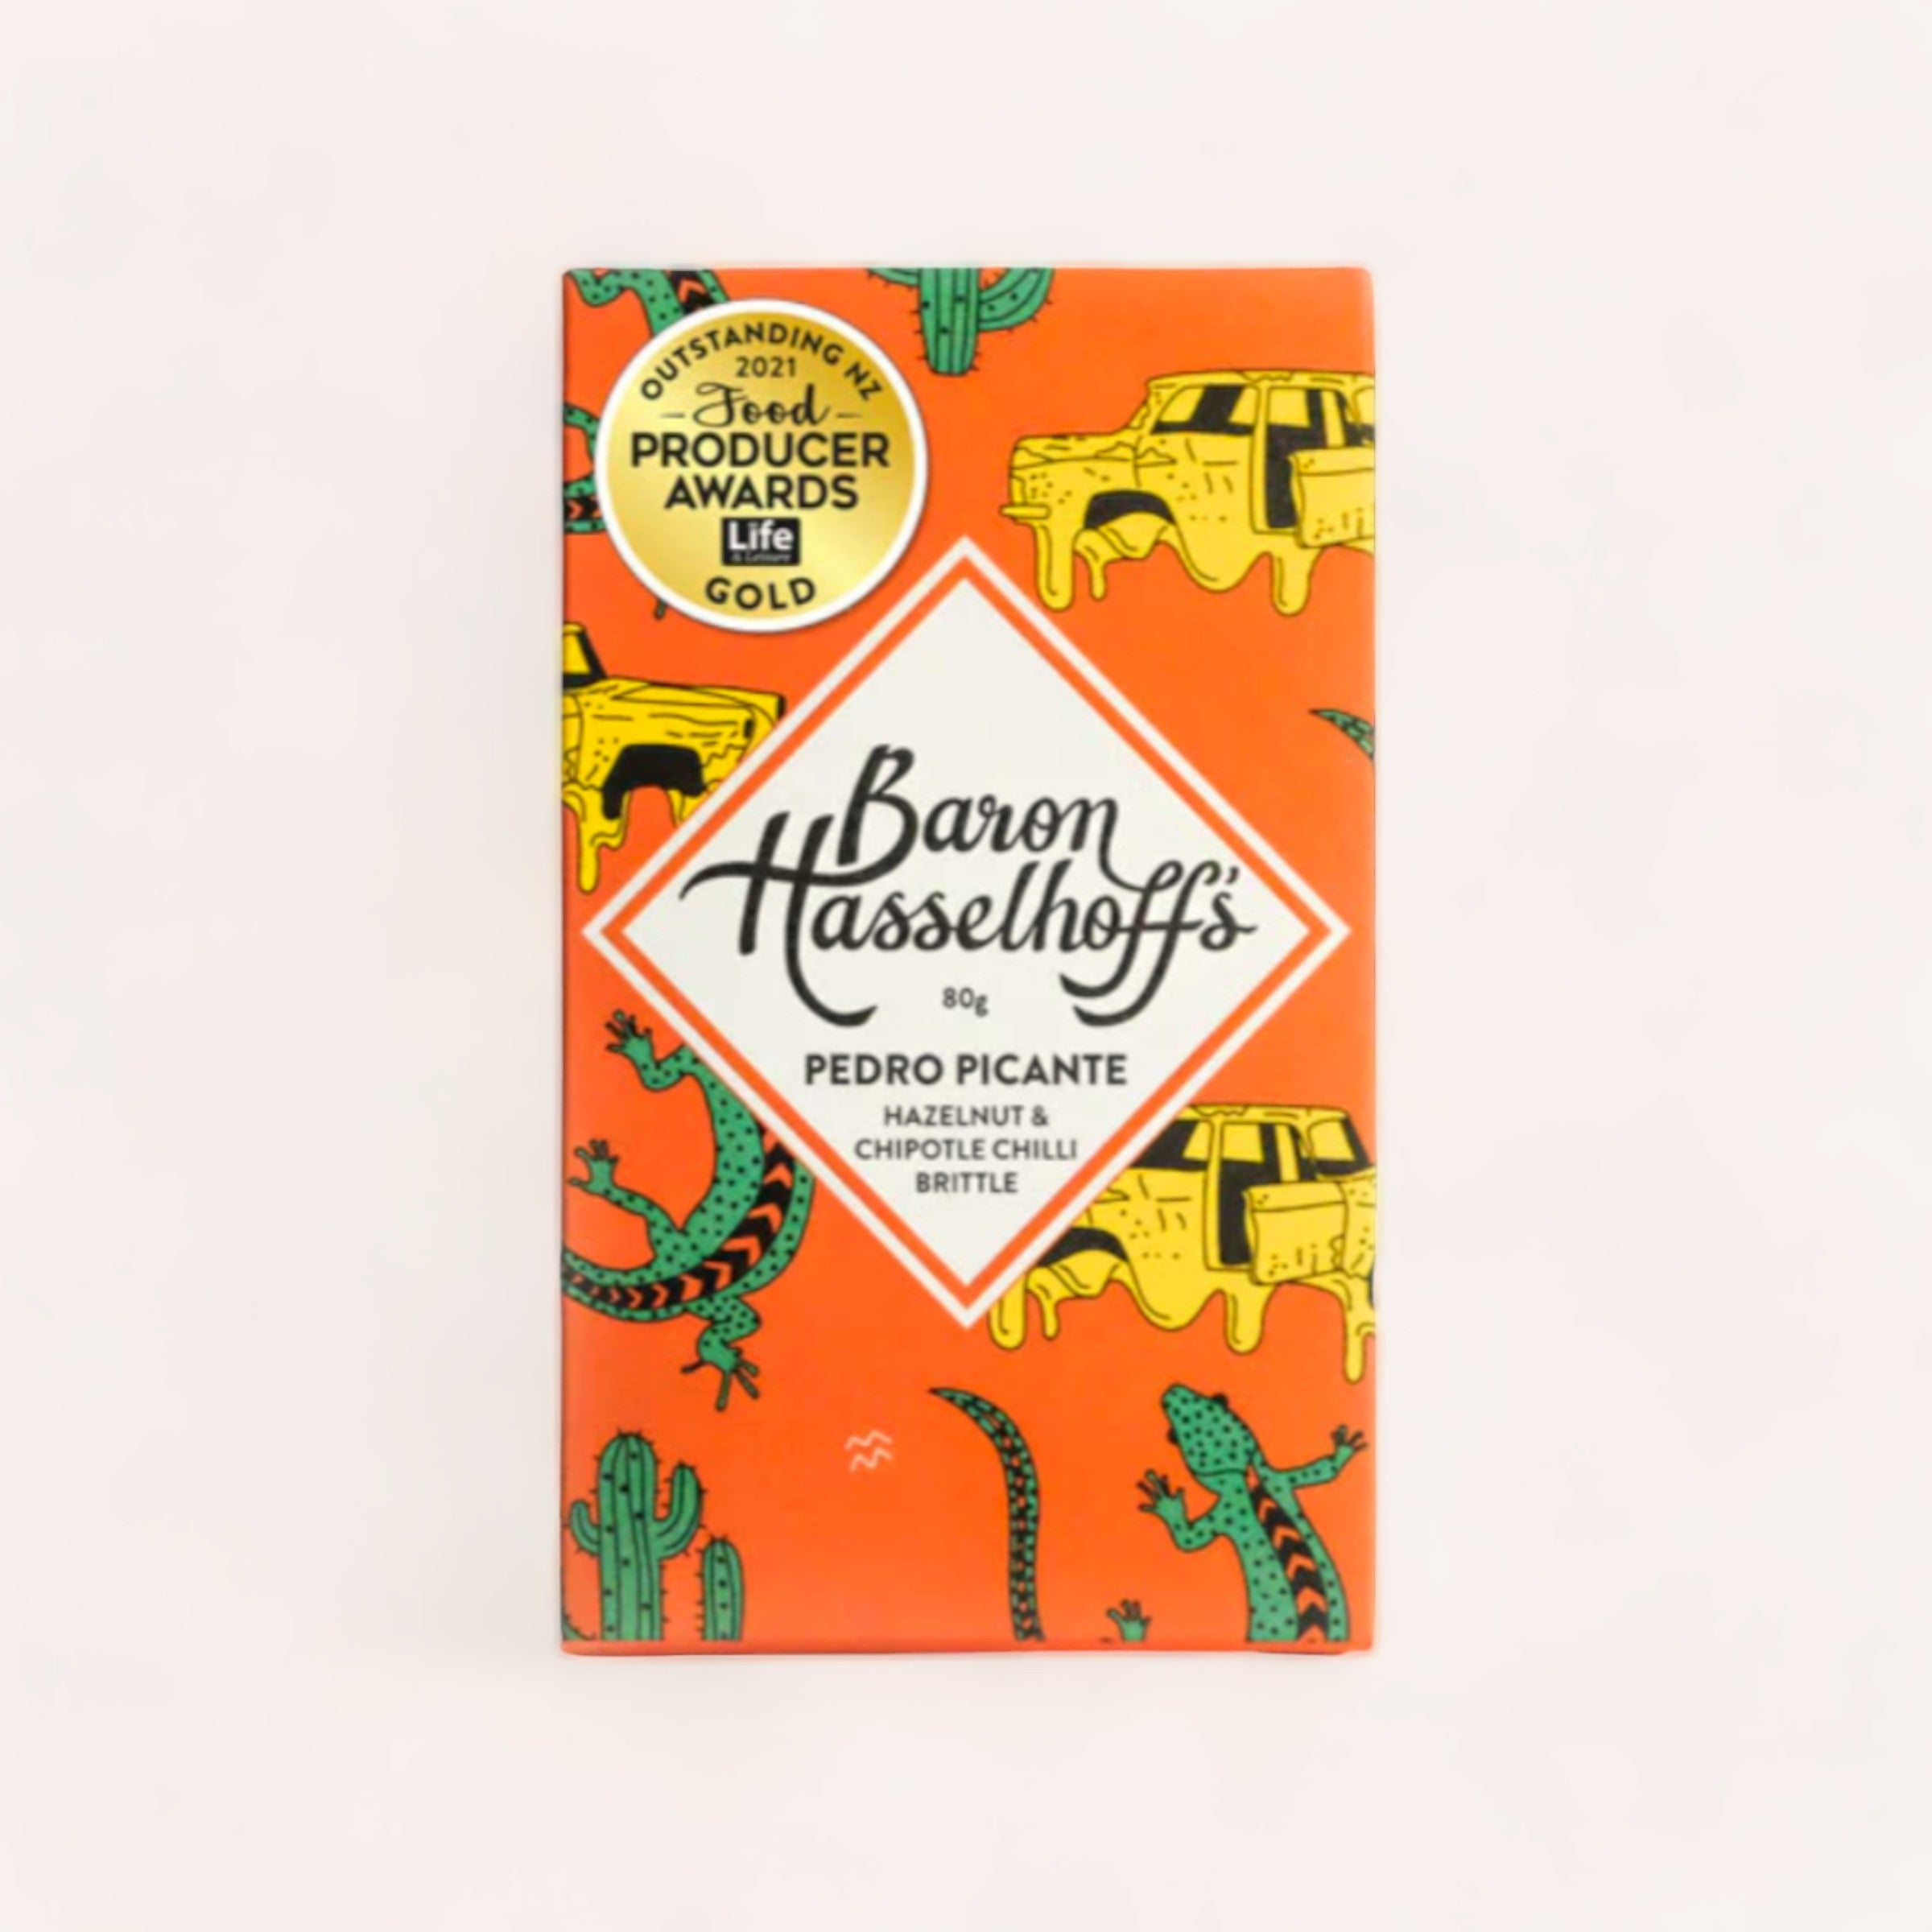 A colorful chocolate bar wrapper with vibrant illustrations of cacti and a unique mix of flavors: Pedro Picante Peanut Brittle, hazelnut brittle & chipotle chilli brittle. The brand is "Baron Hasselhoff's".